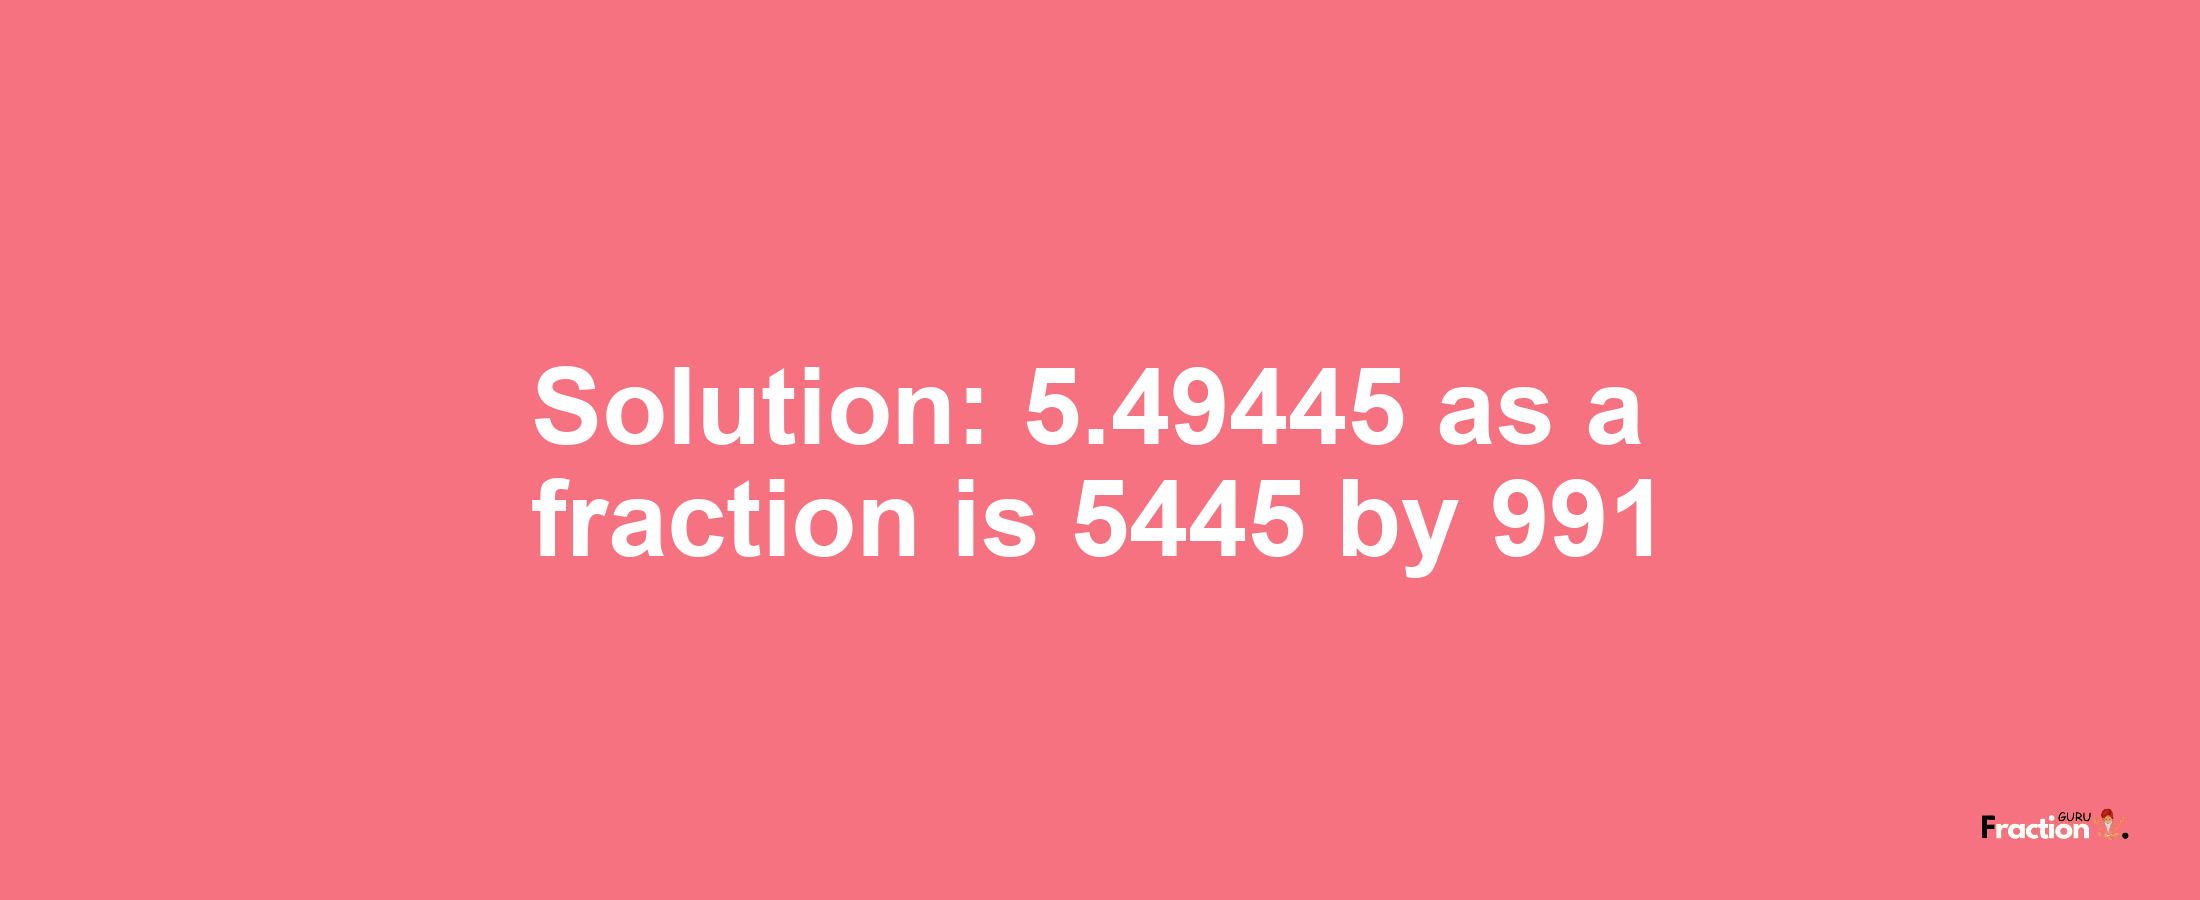 Solution:5.49445 as a fraction is 5445/991